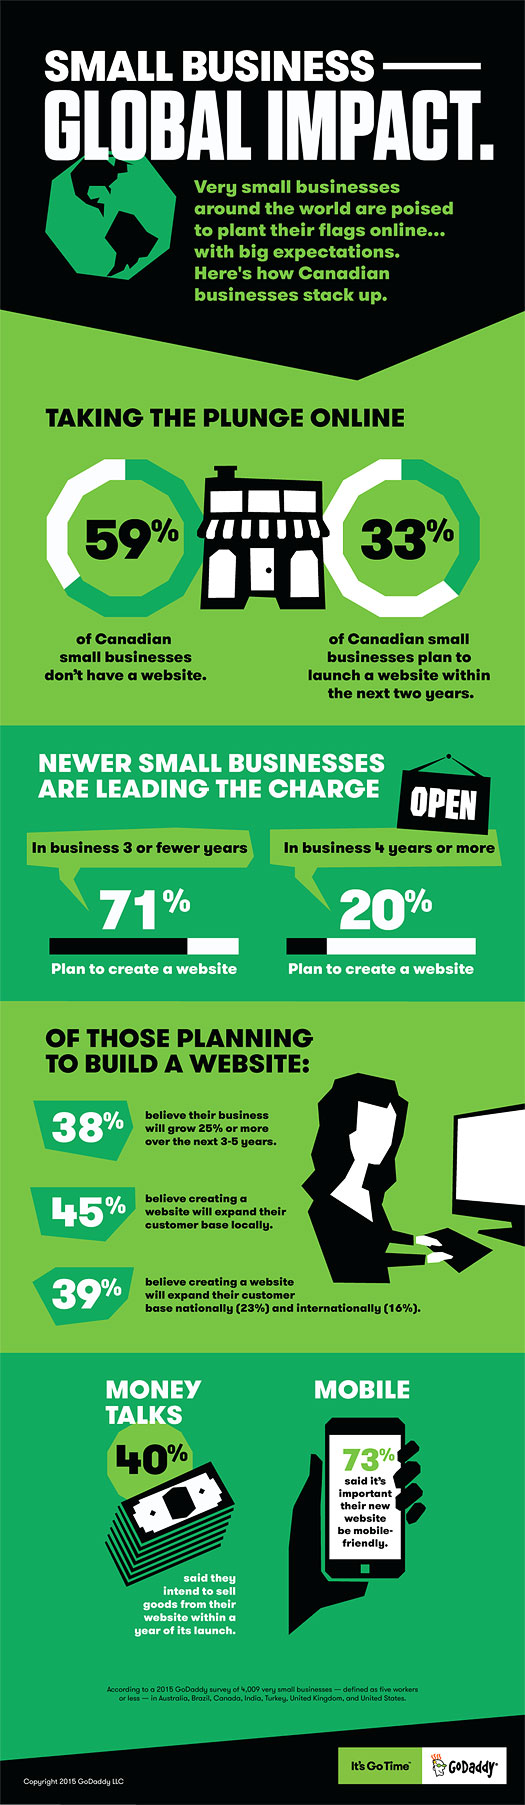 Most Canadian Micro-Businesses Don't Have a Website (Statistics & Infographic)